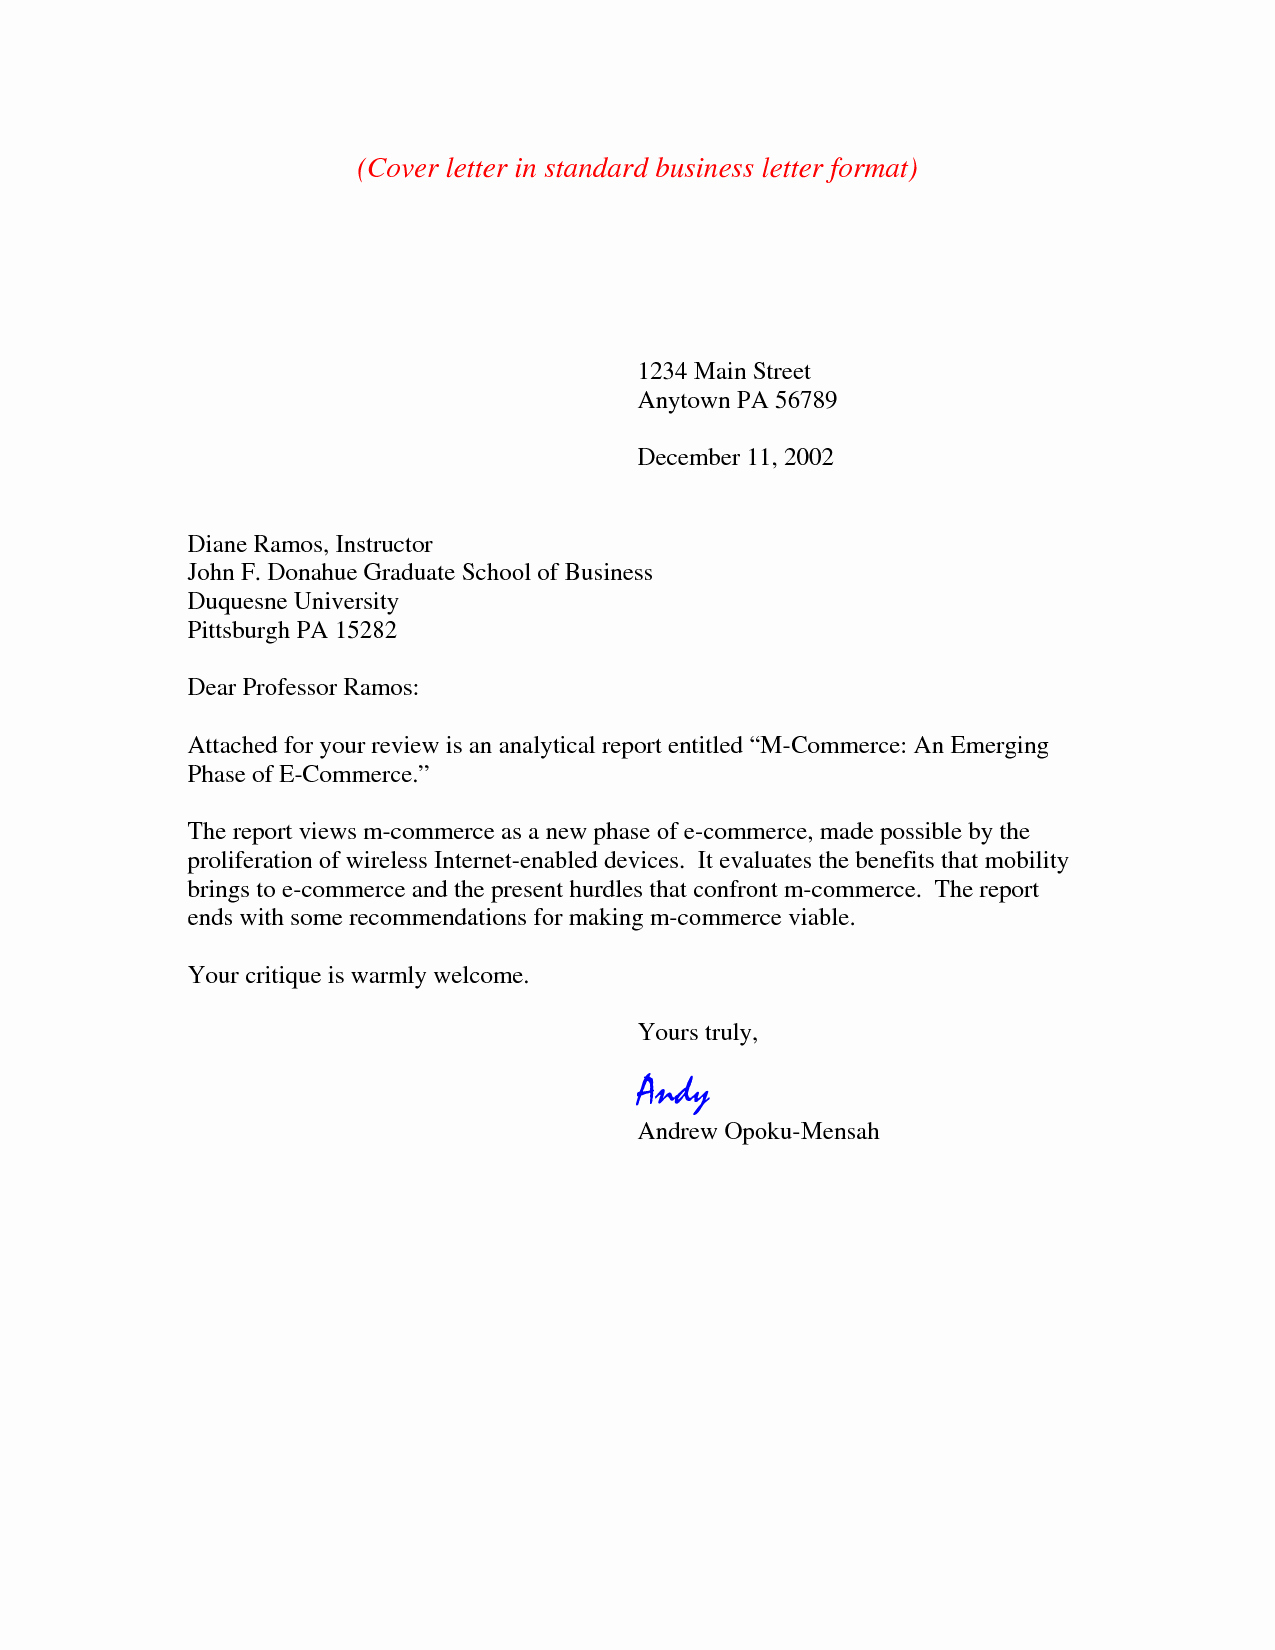 Formal Business Letter format Template New Standard Business Letter format